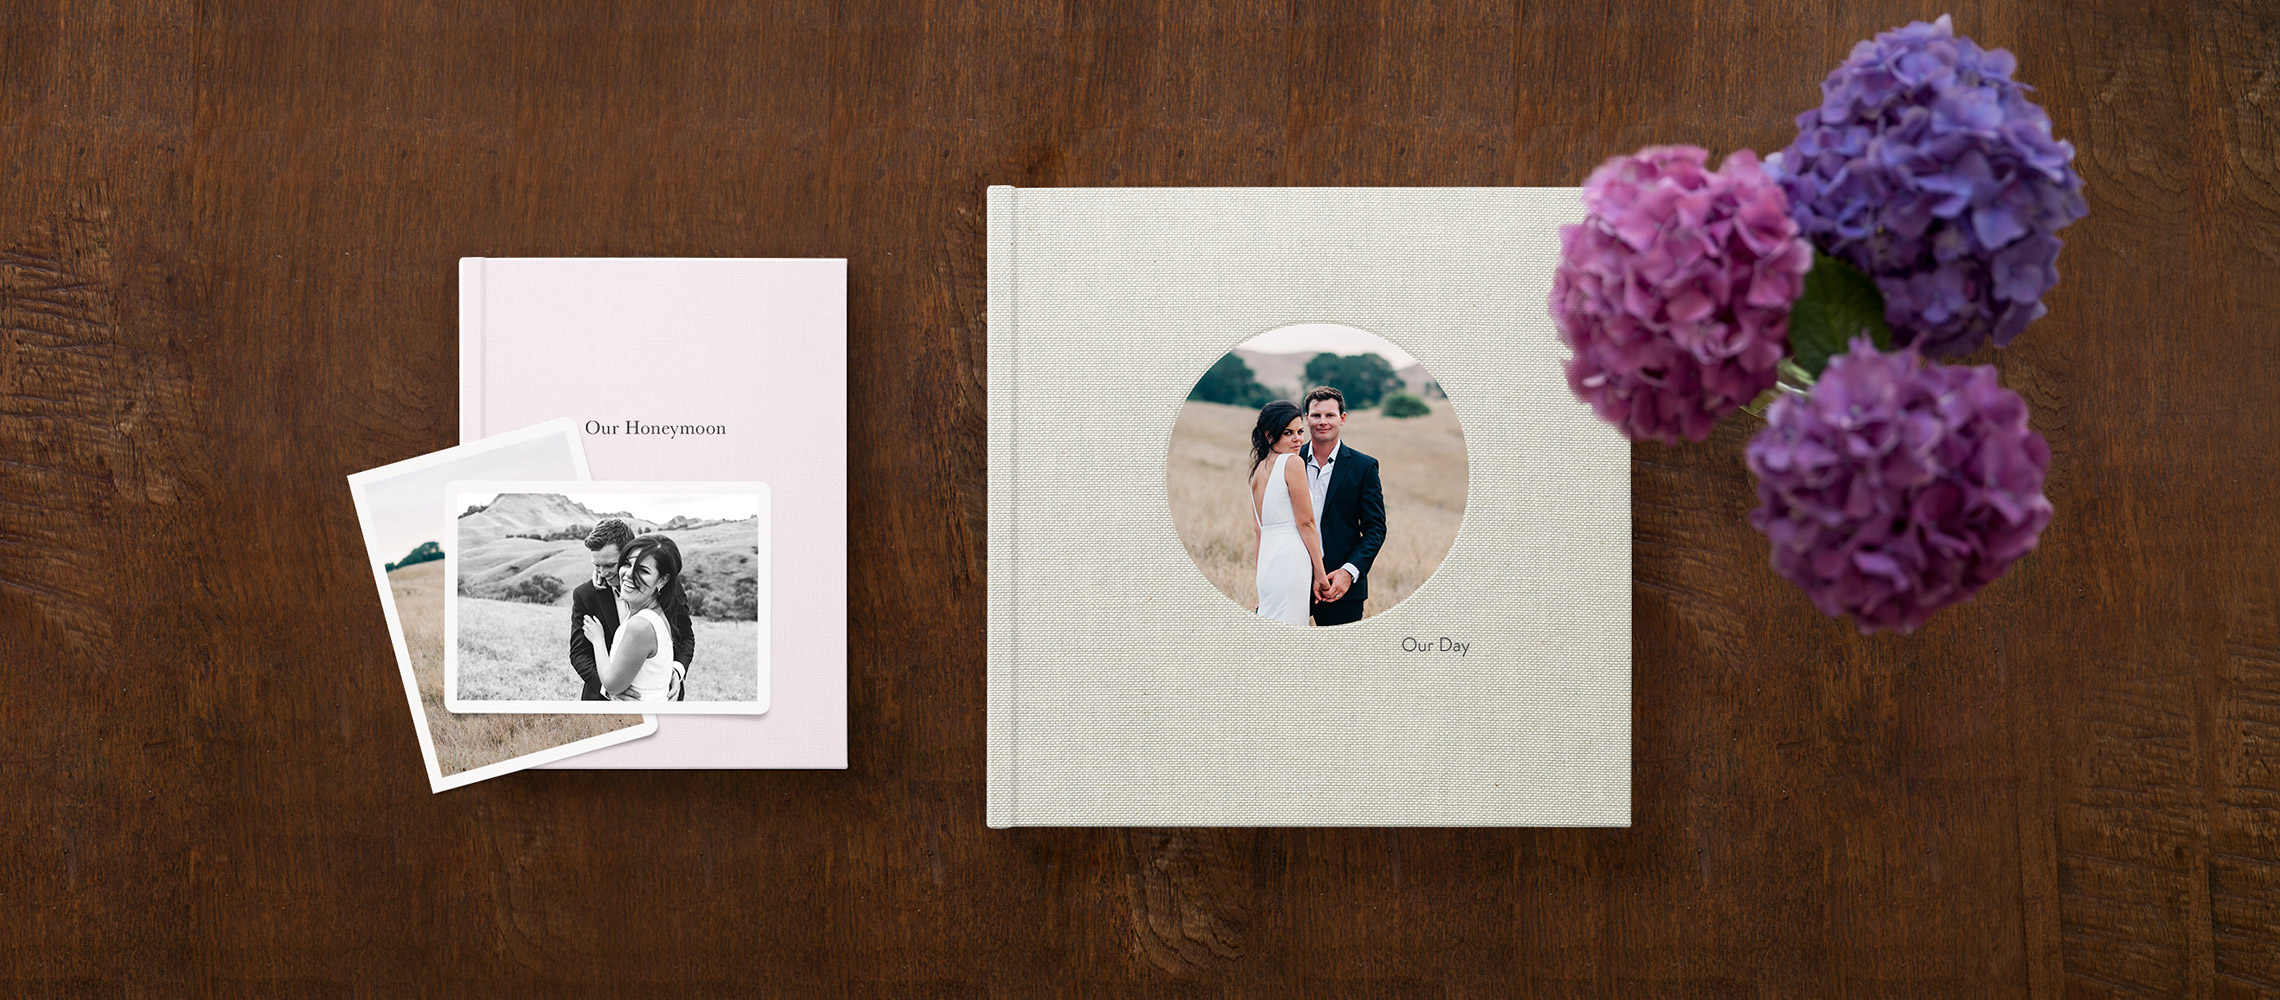 Wedding collection of photo album photo book and thank you cards.